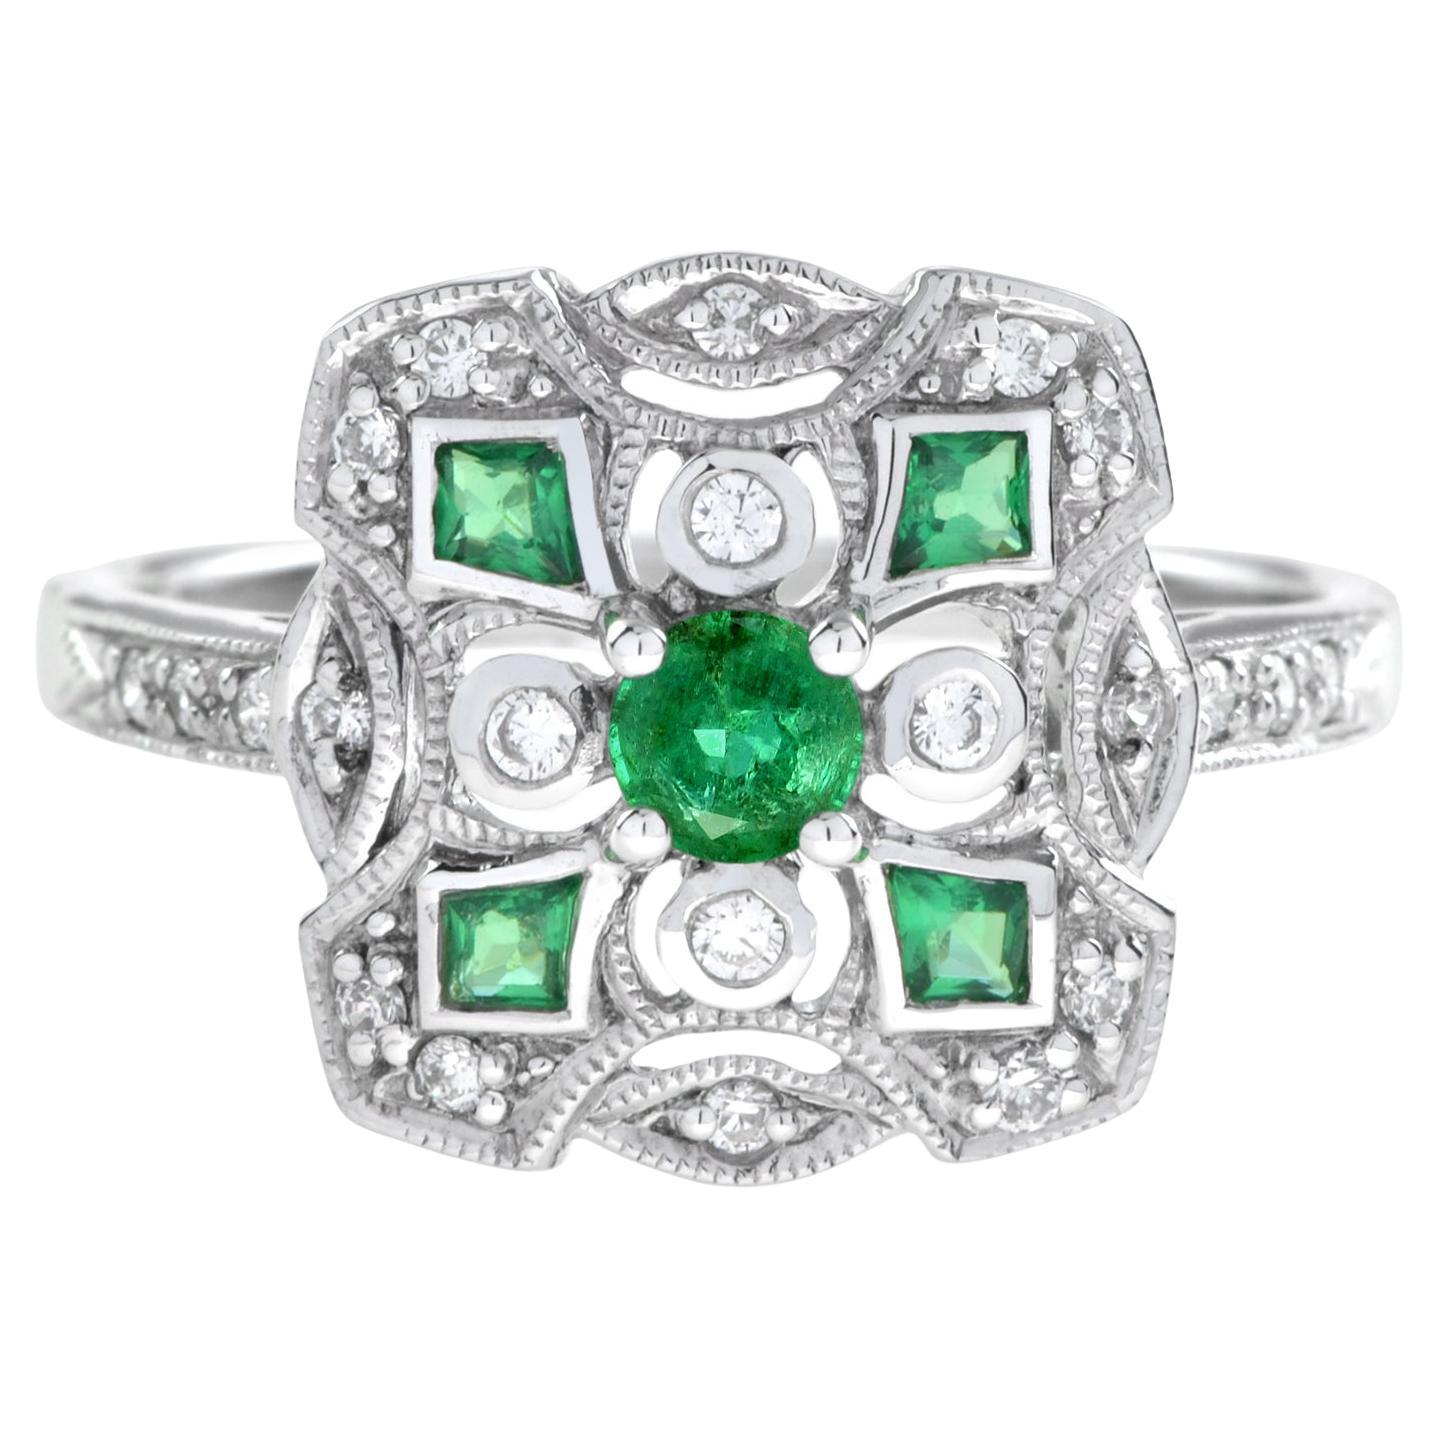 For Sale:  Art Deco Style Emerald and Diamond Cluster Ring in 18K White Gold